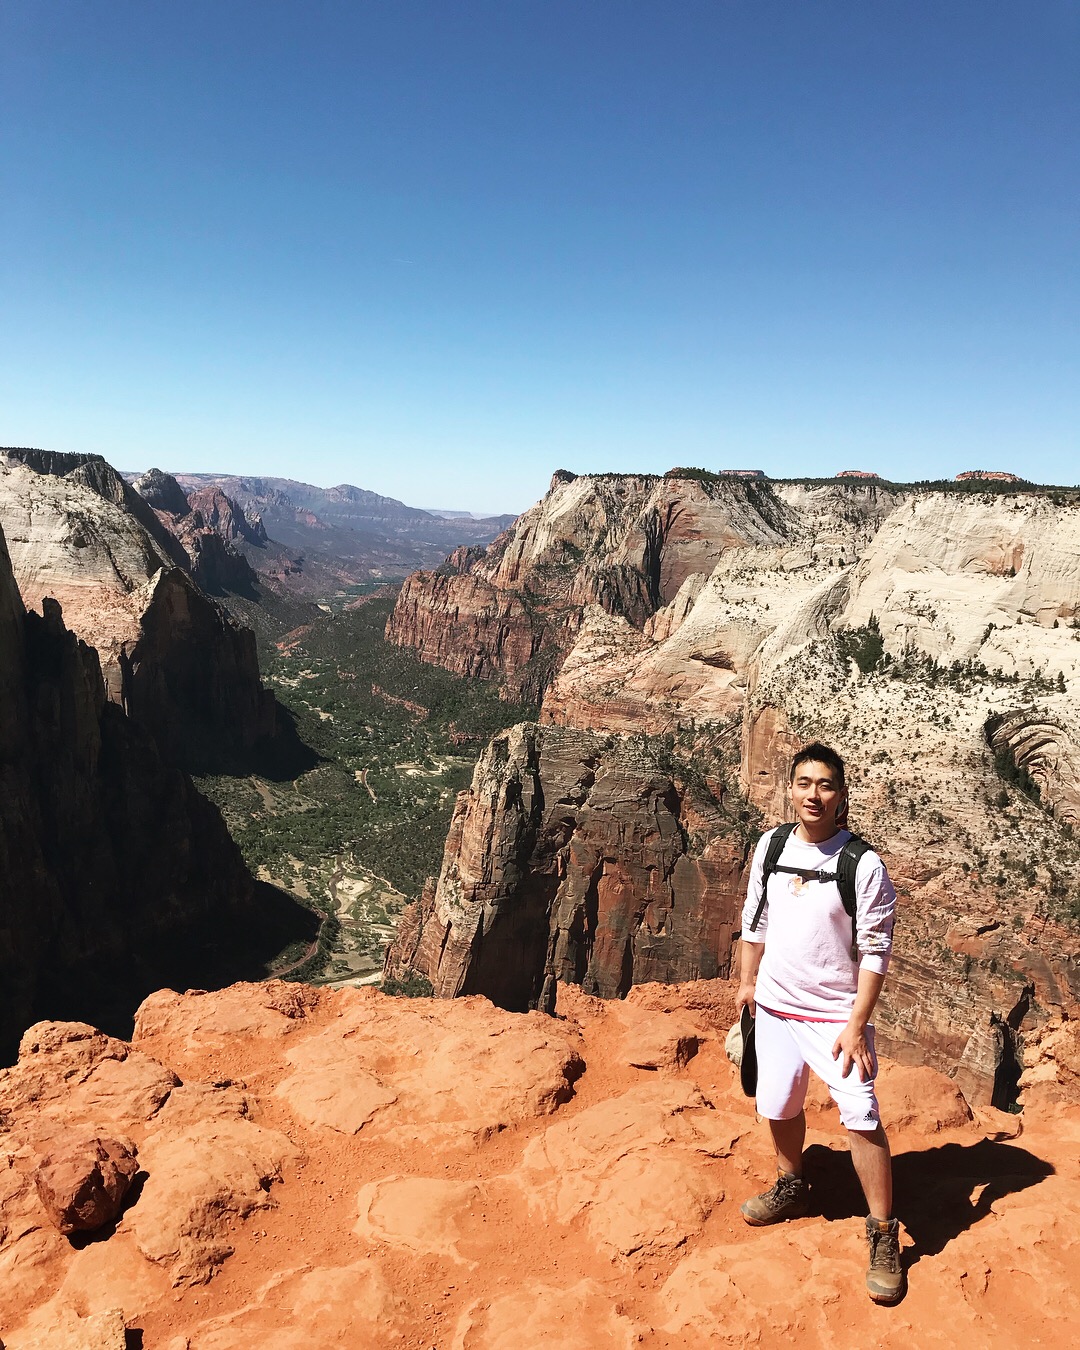 Philip standing atop Observation Point in Zion National Park, Utah.